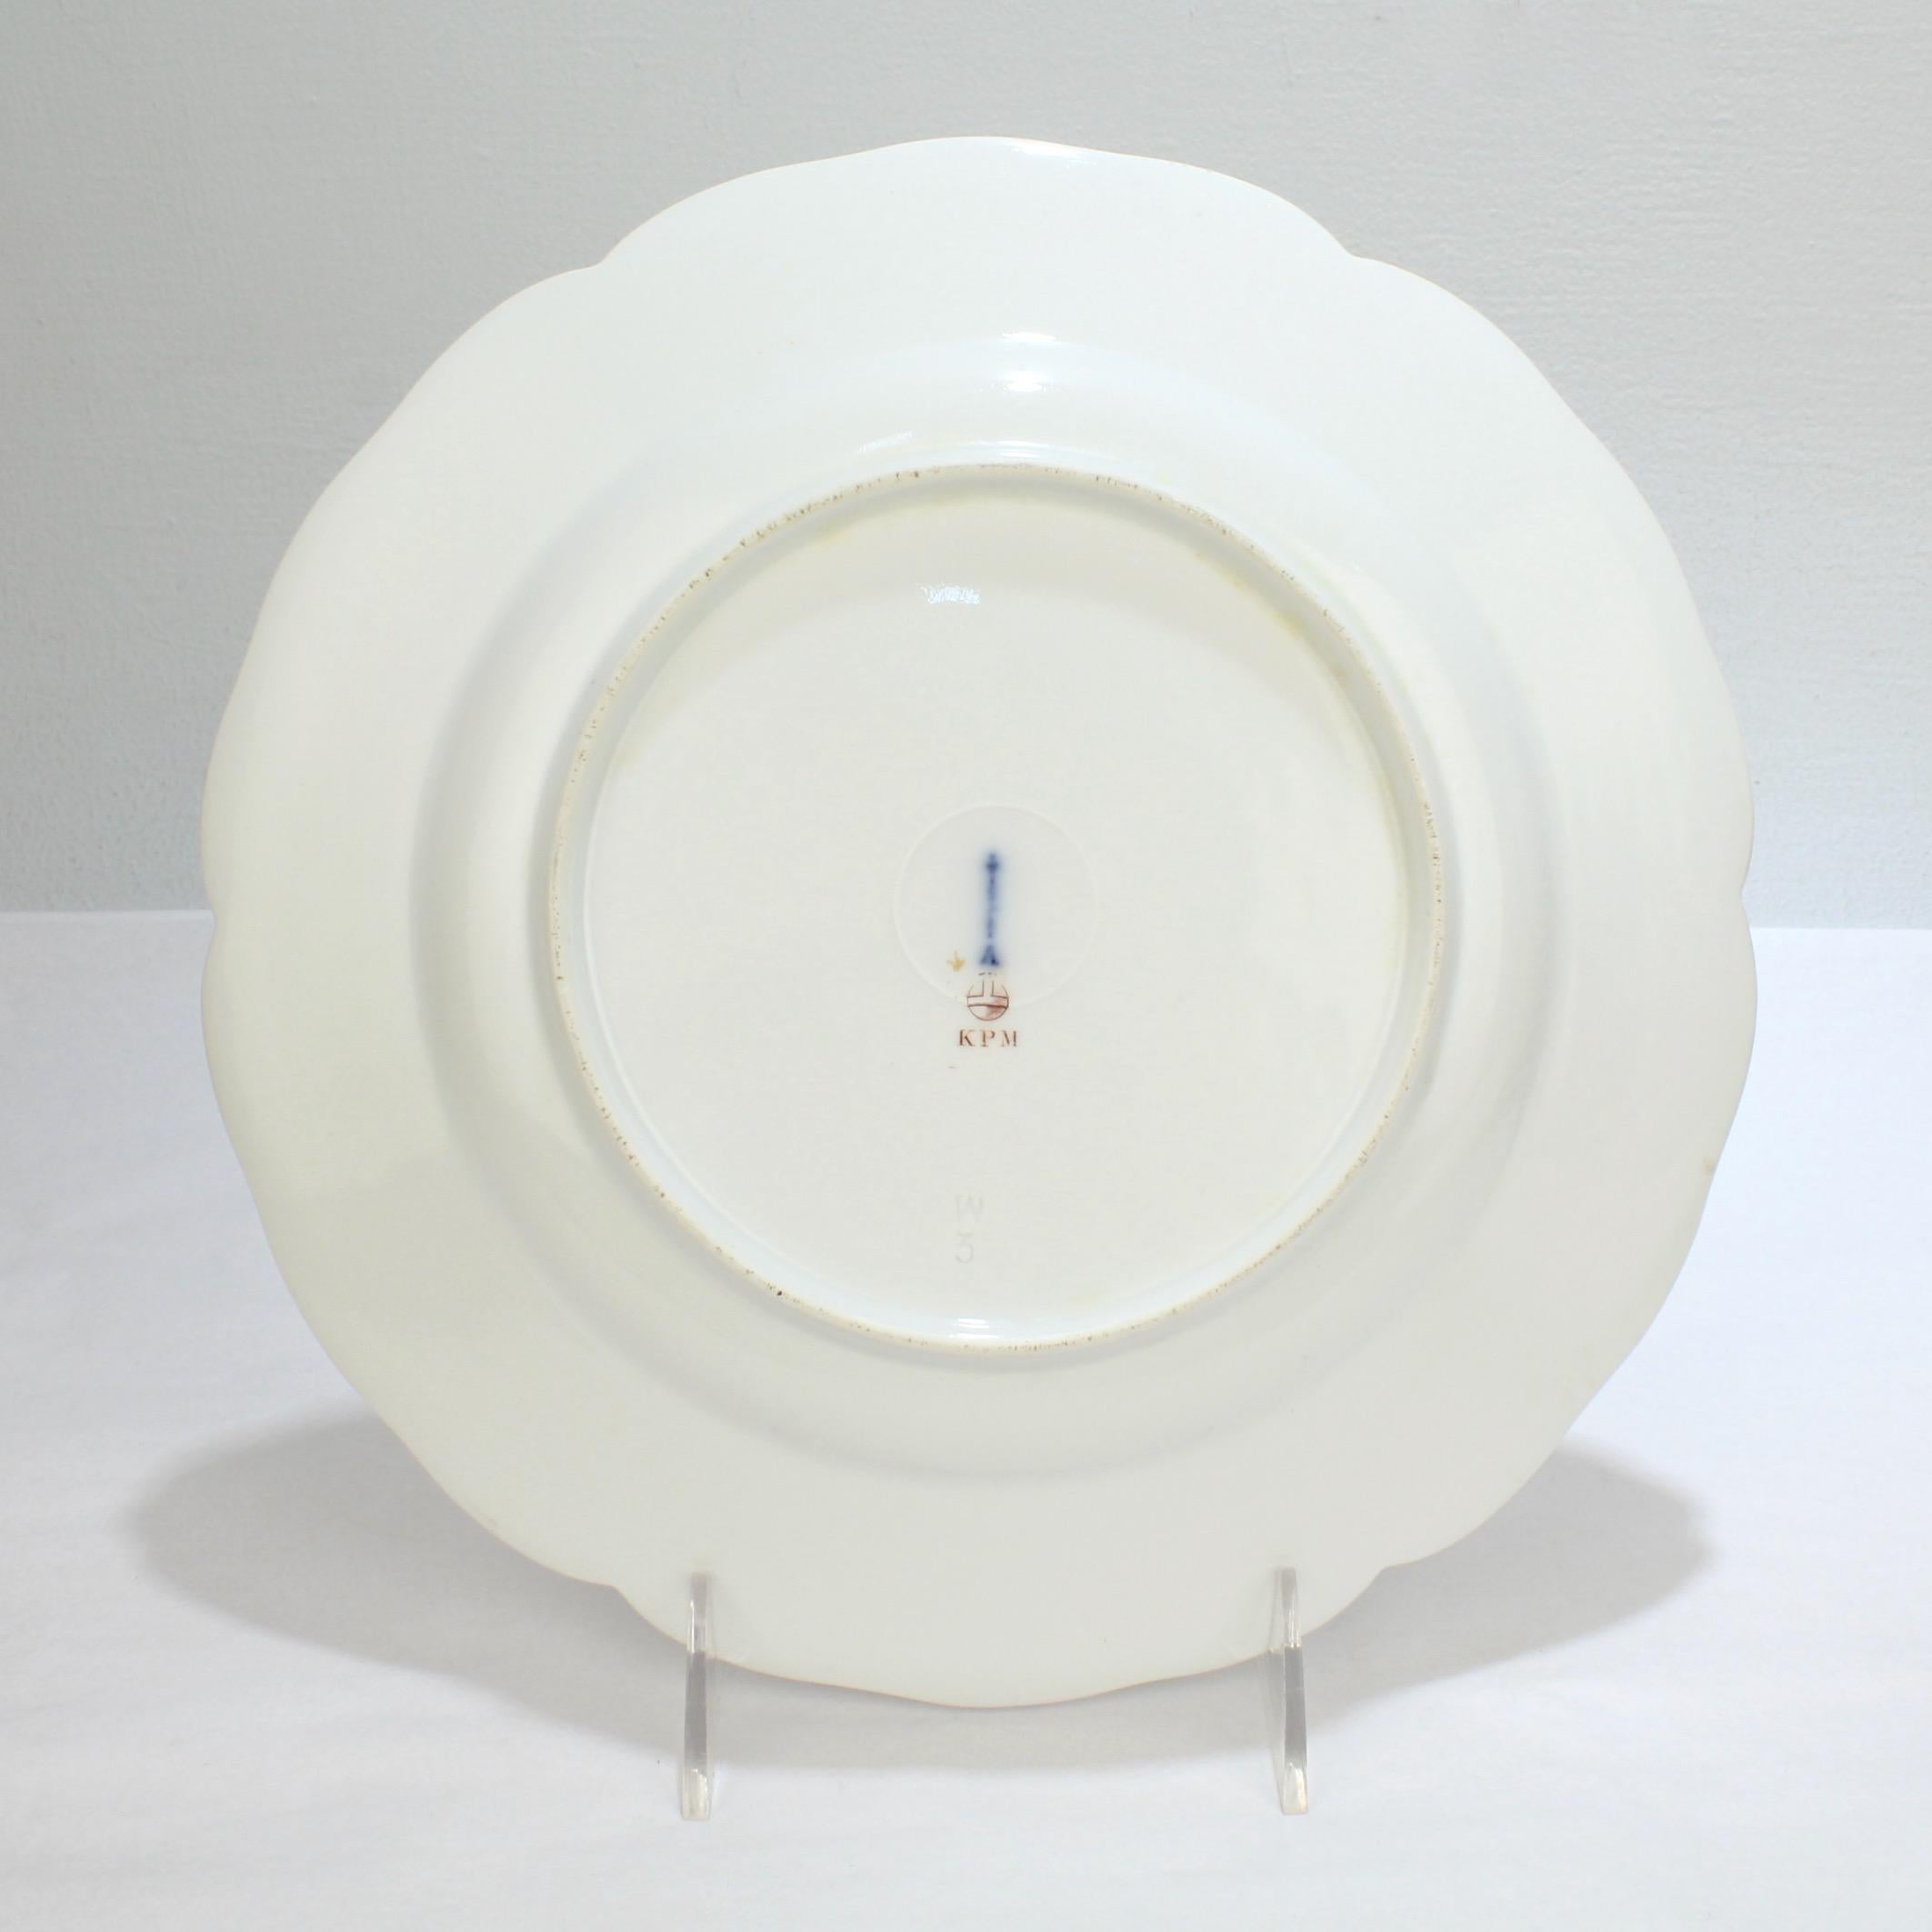 20th Century Set of 12 KPM Royal Berlin Porcelain Reliefzierat Dinner Plates in Puce